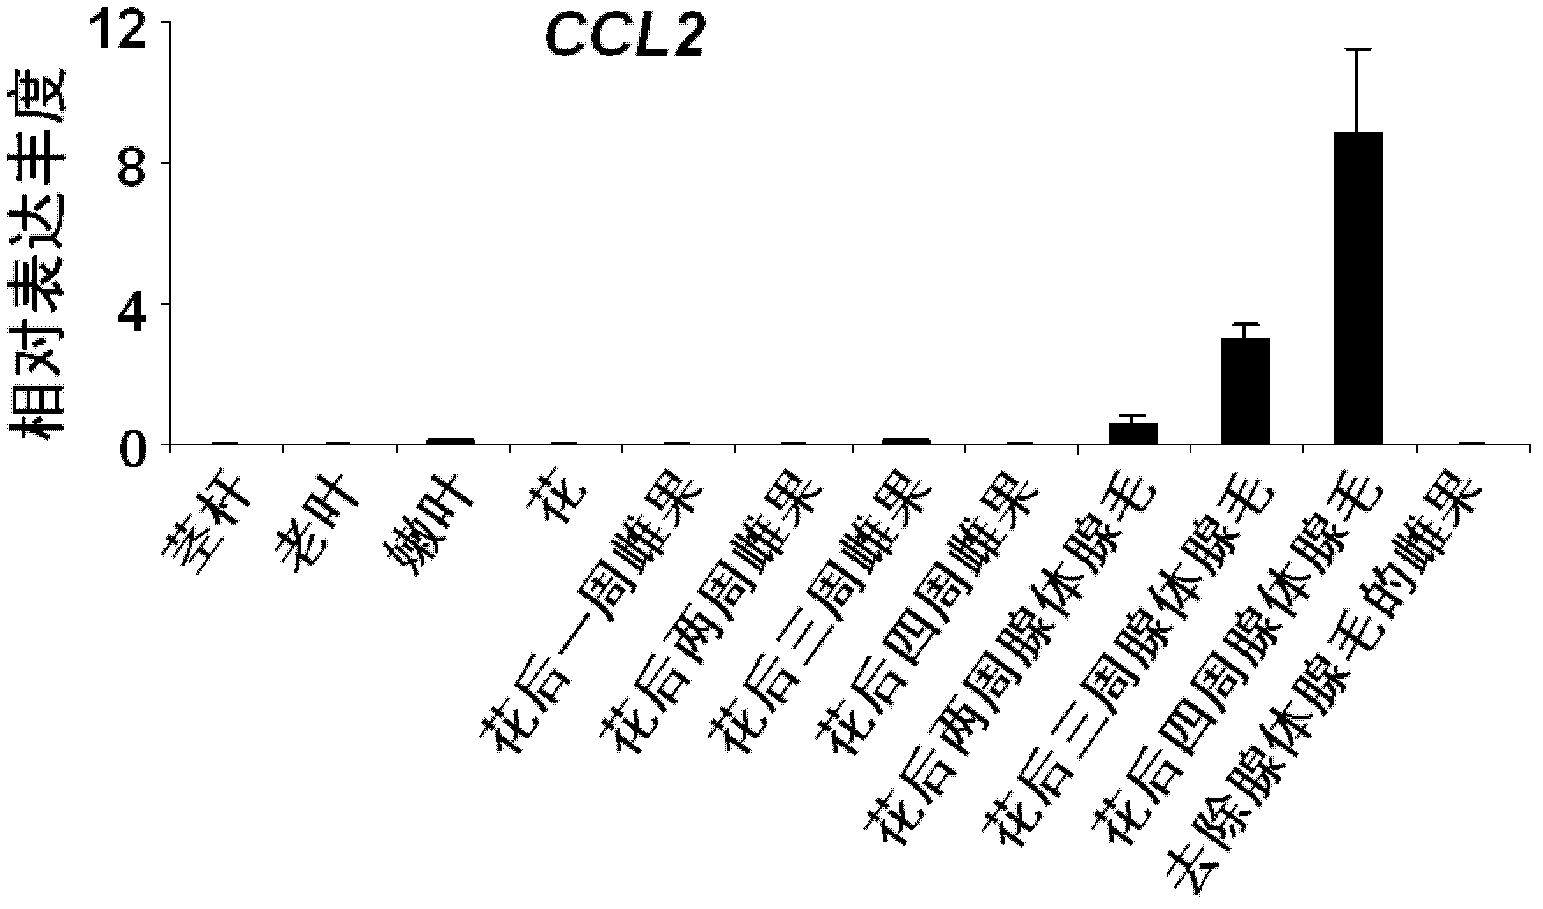 Fatty acid CoA ligase CCL2 of short-side chains of humulus lupulus, and coding gene and application of fatty acid CoA ligase CCL2